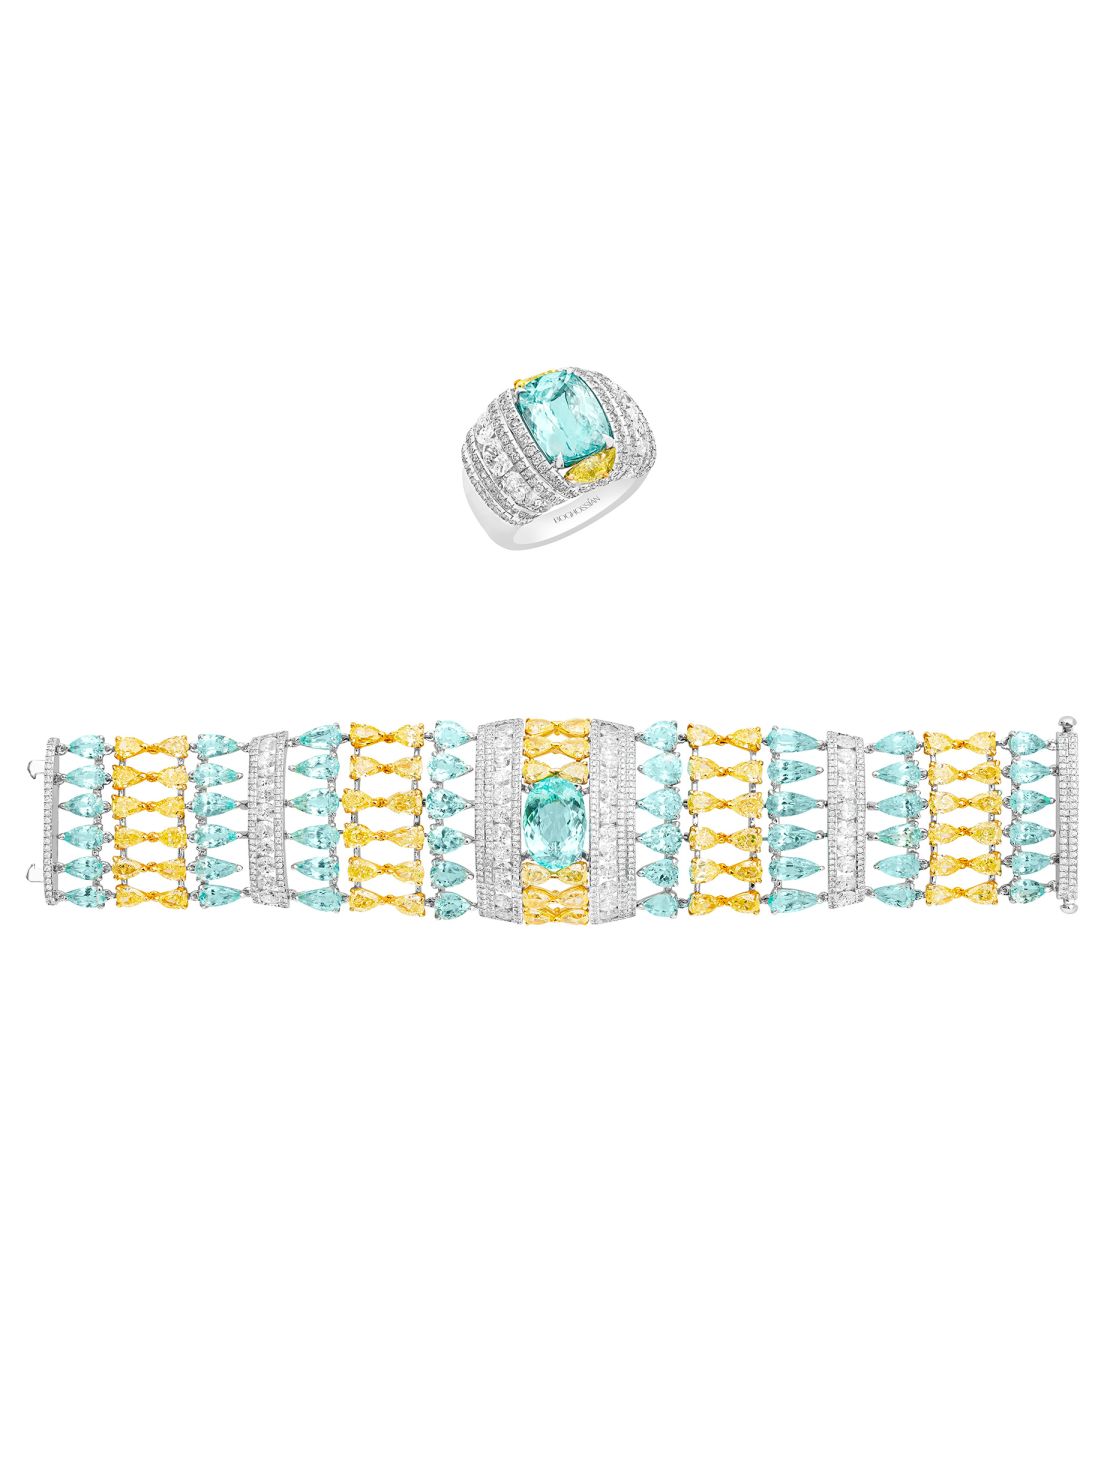 Boghossian's paraiba and diamond set features paraibas and fancy yellow diamonds. The central piece of the bracelet is composed of one oval-shaped paraiba and the ring of one cushion-shaped paraiba.